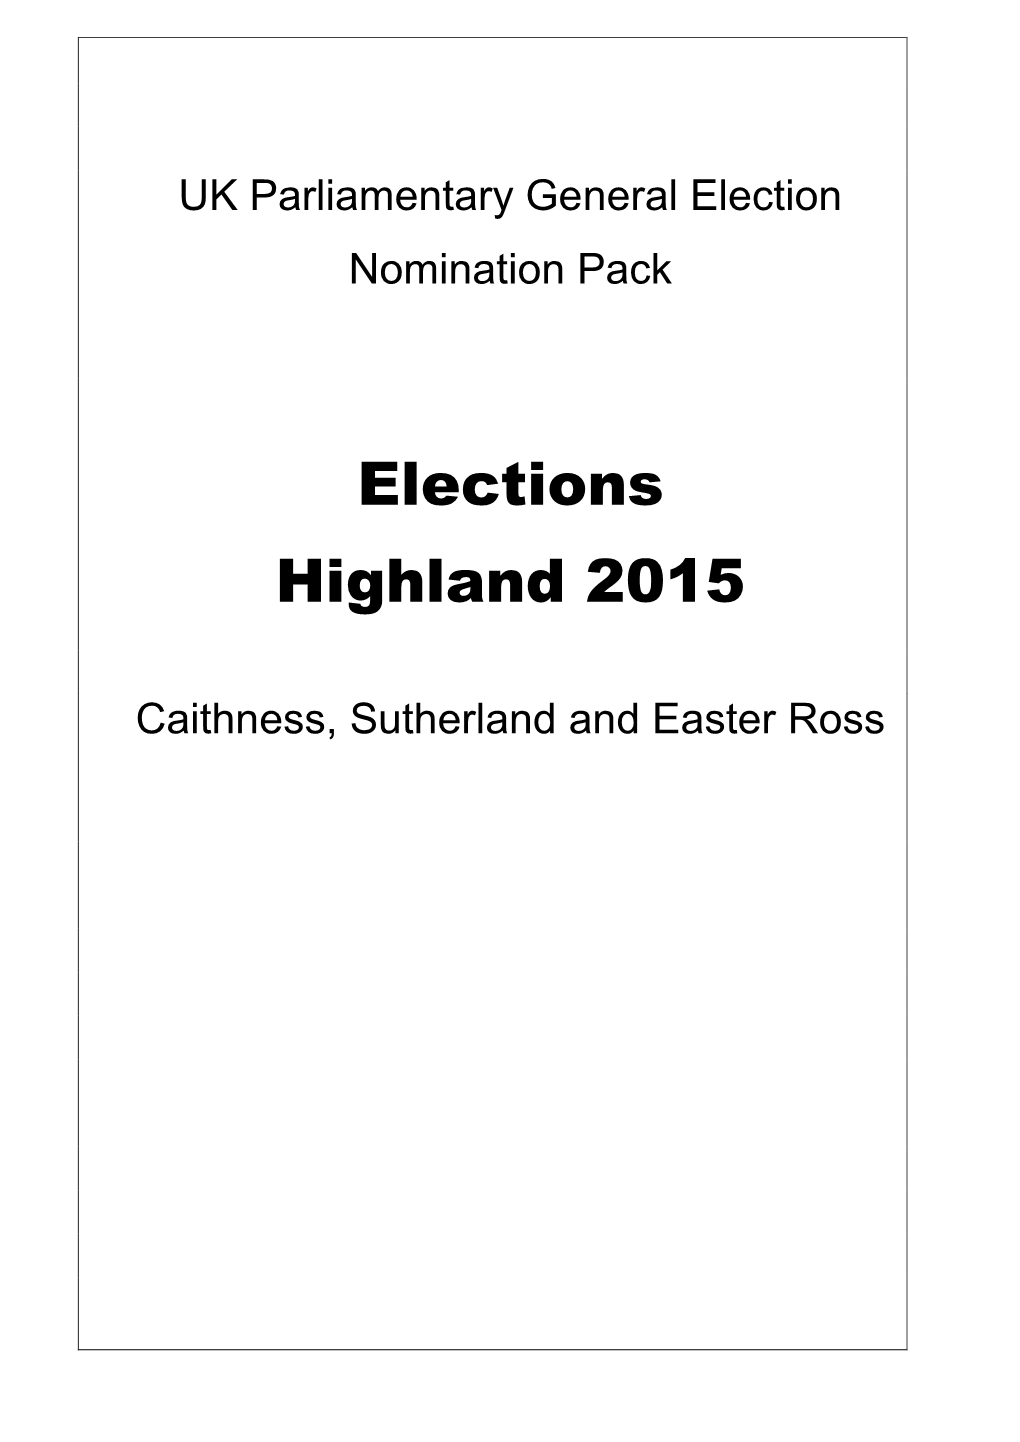 Elections Highland 2015